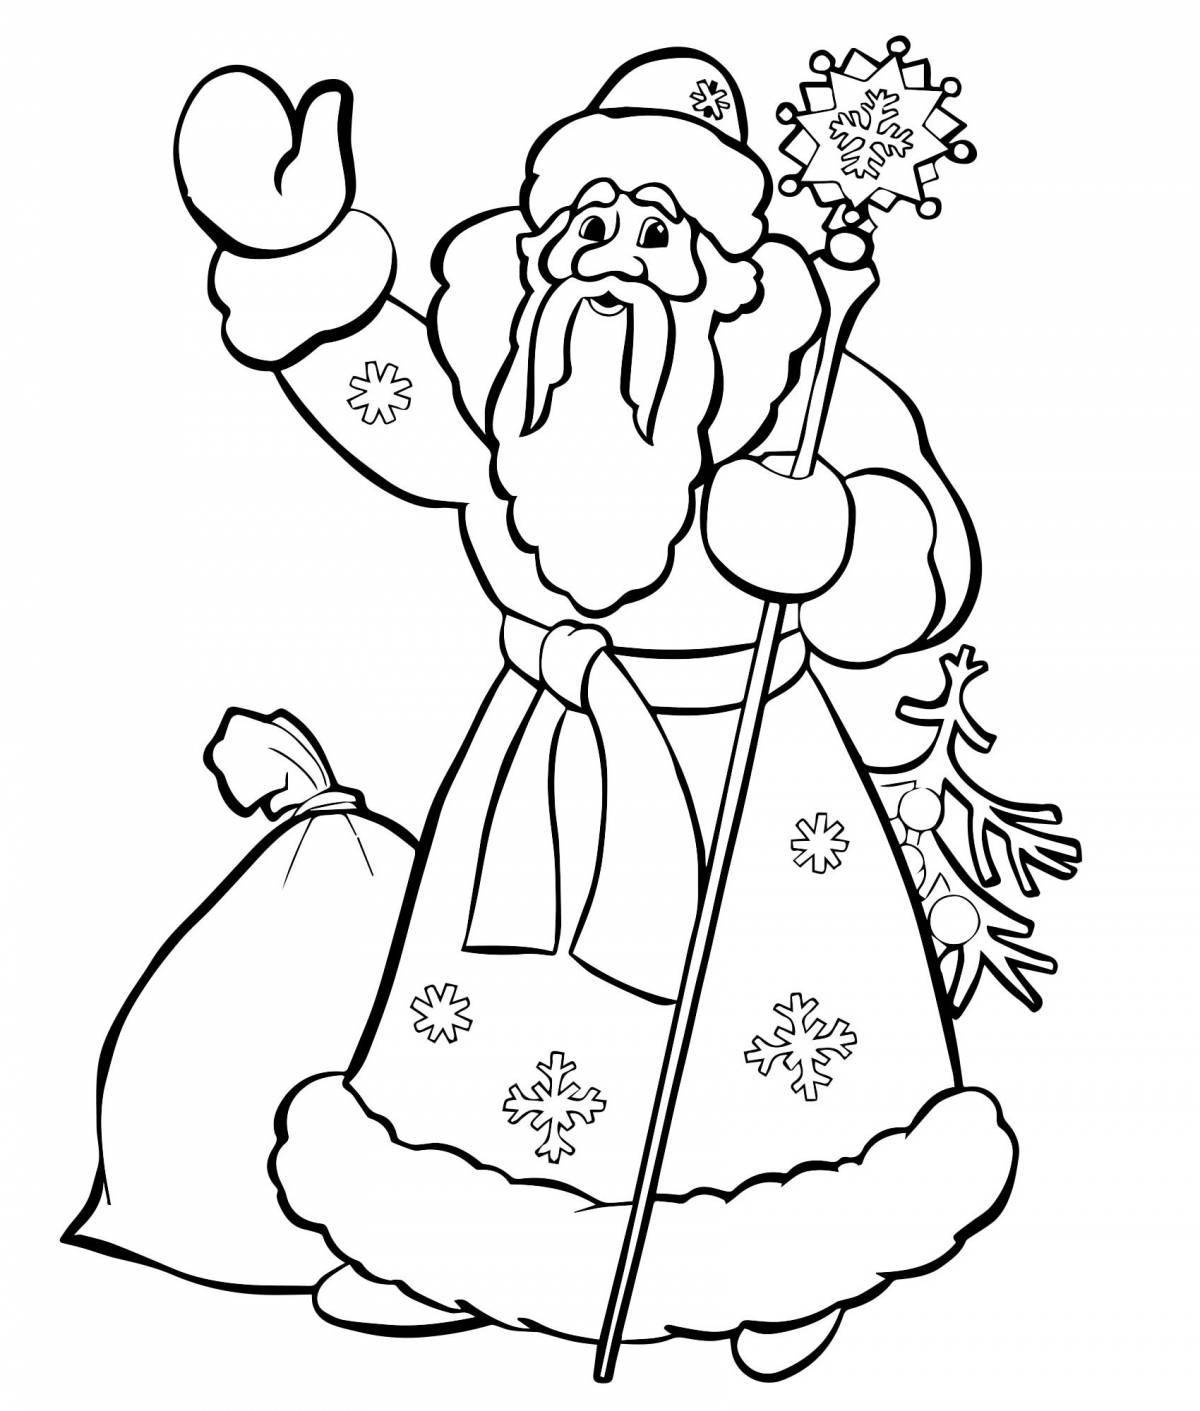 Charming freezing coloring book